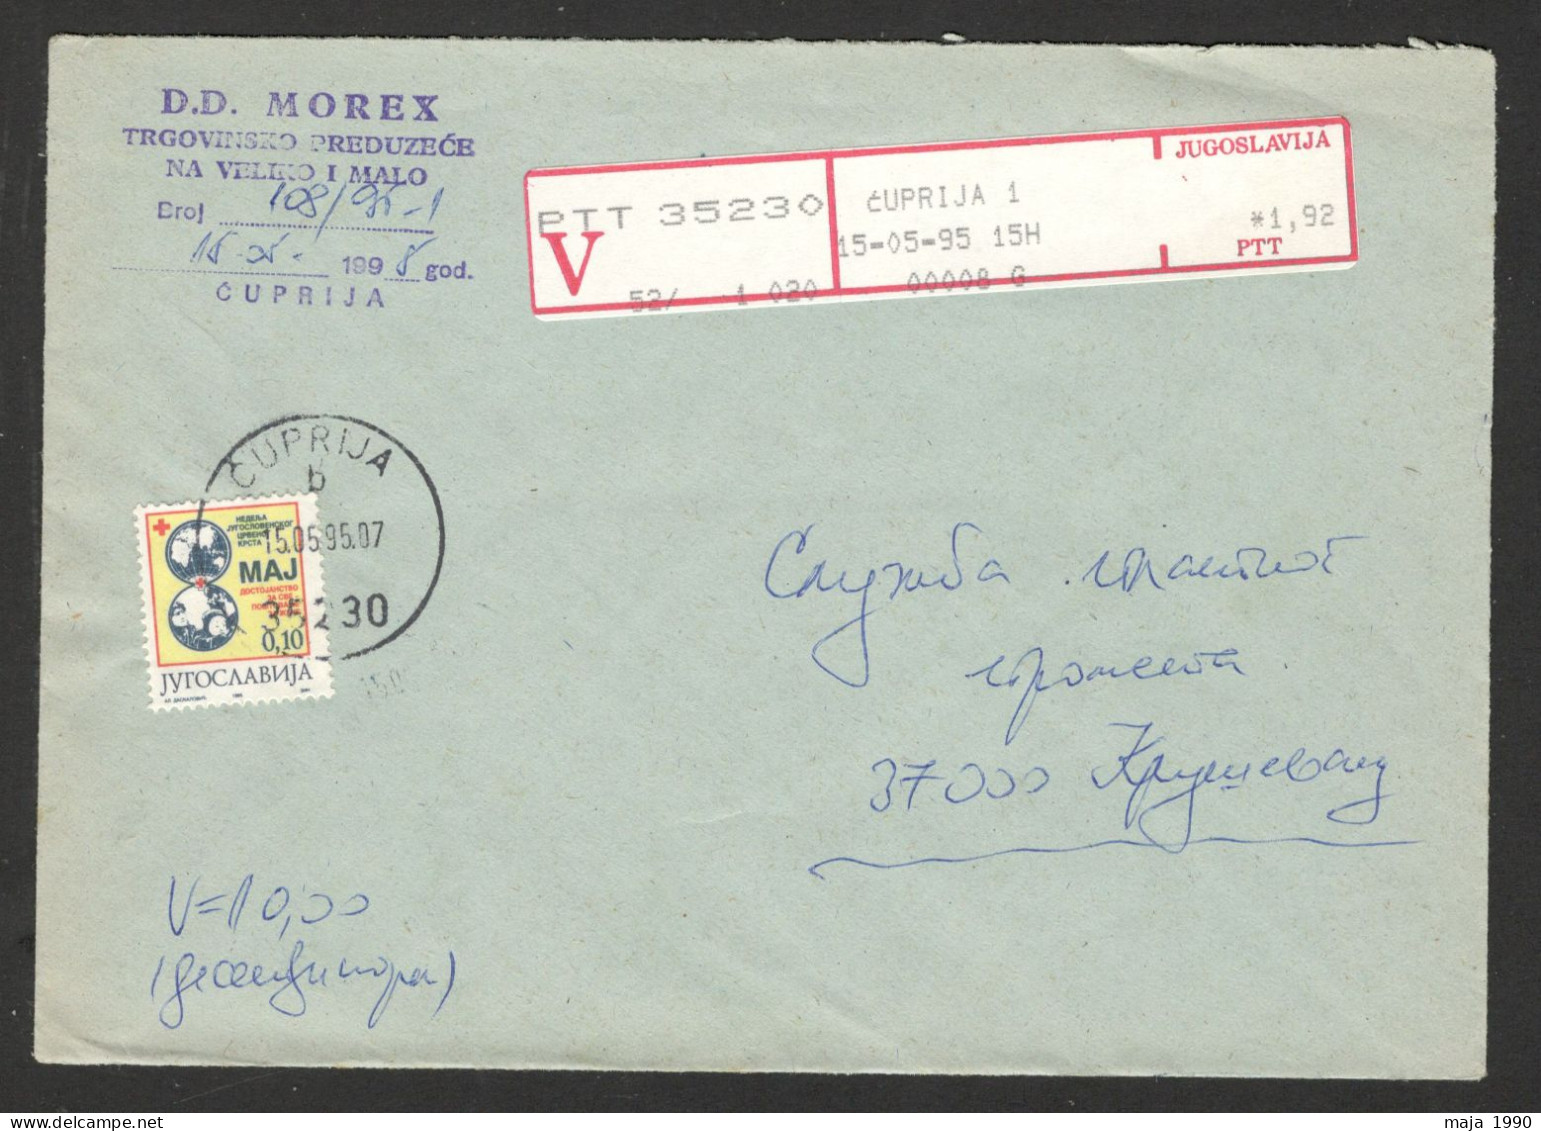 YUGOSLAVIA SERBIA - VALUE OFFICIAL COVER WITH TAX STAMP "RED CROSS" - 1995. - Covers & Documents